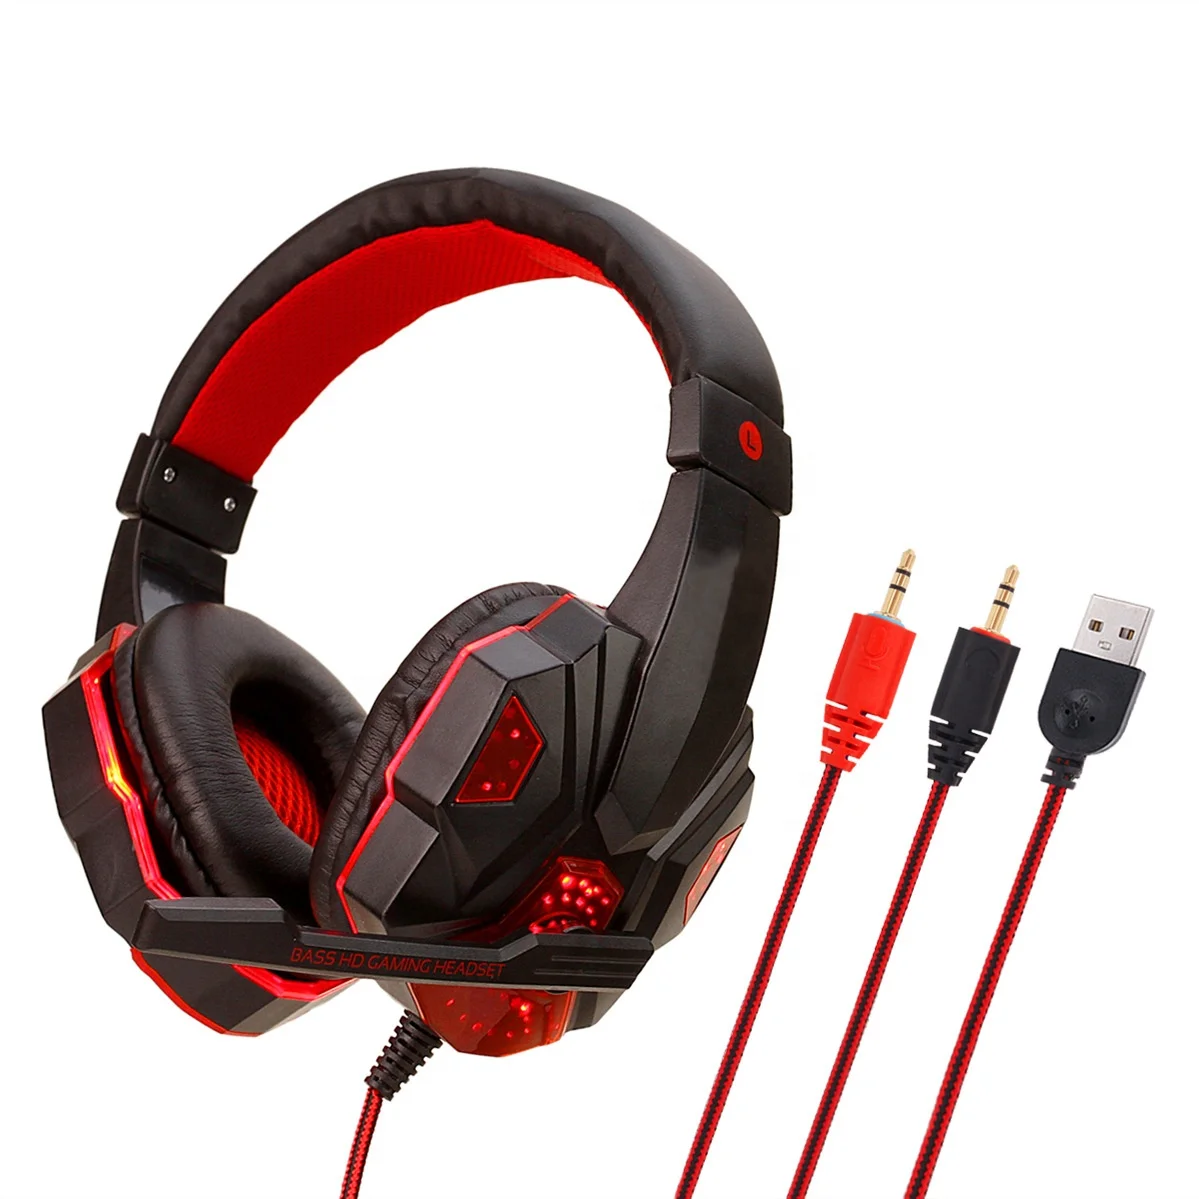 

Hot Sale Cool LED Backlight Wired Gaming Headphones With Mic Volume Control Stereo Gaming Headset For Phone Computer PC Gamer